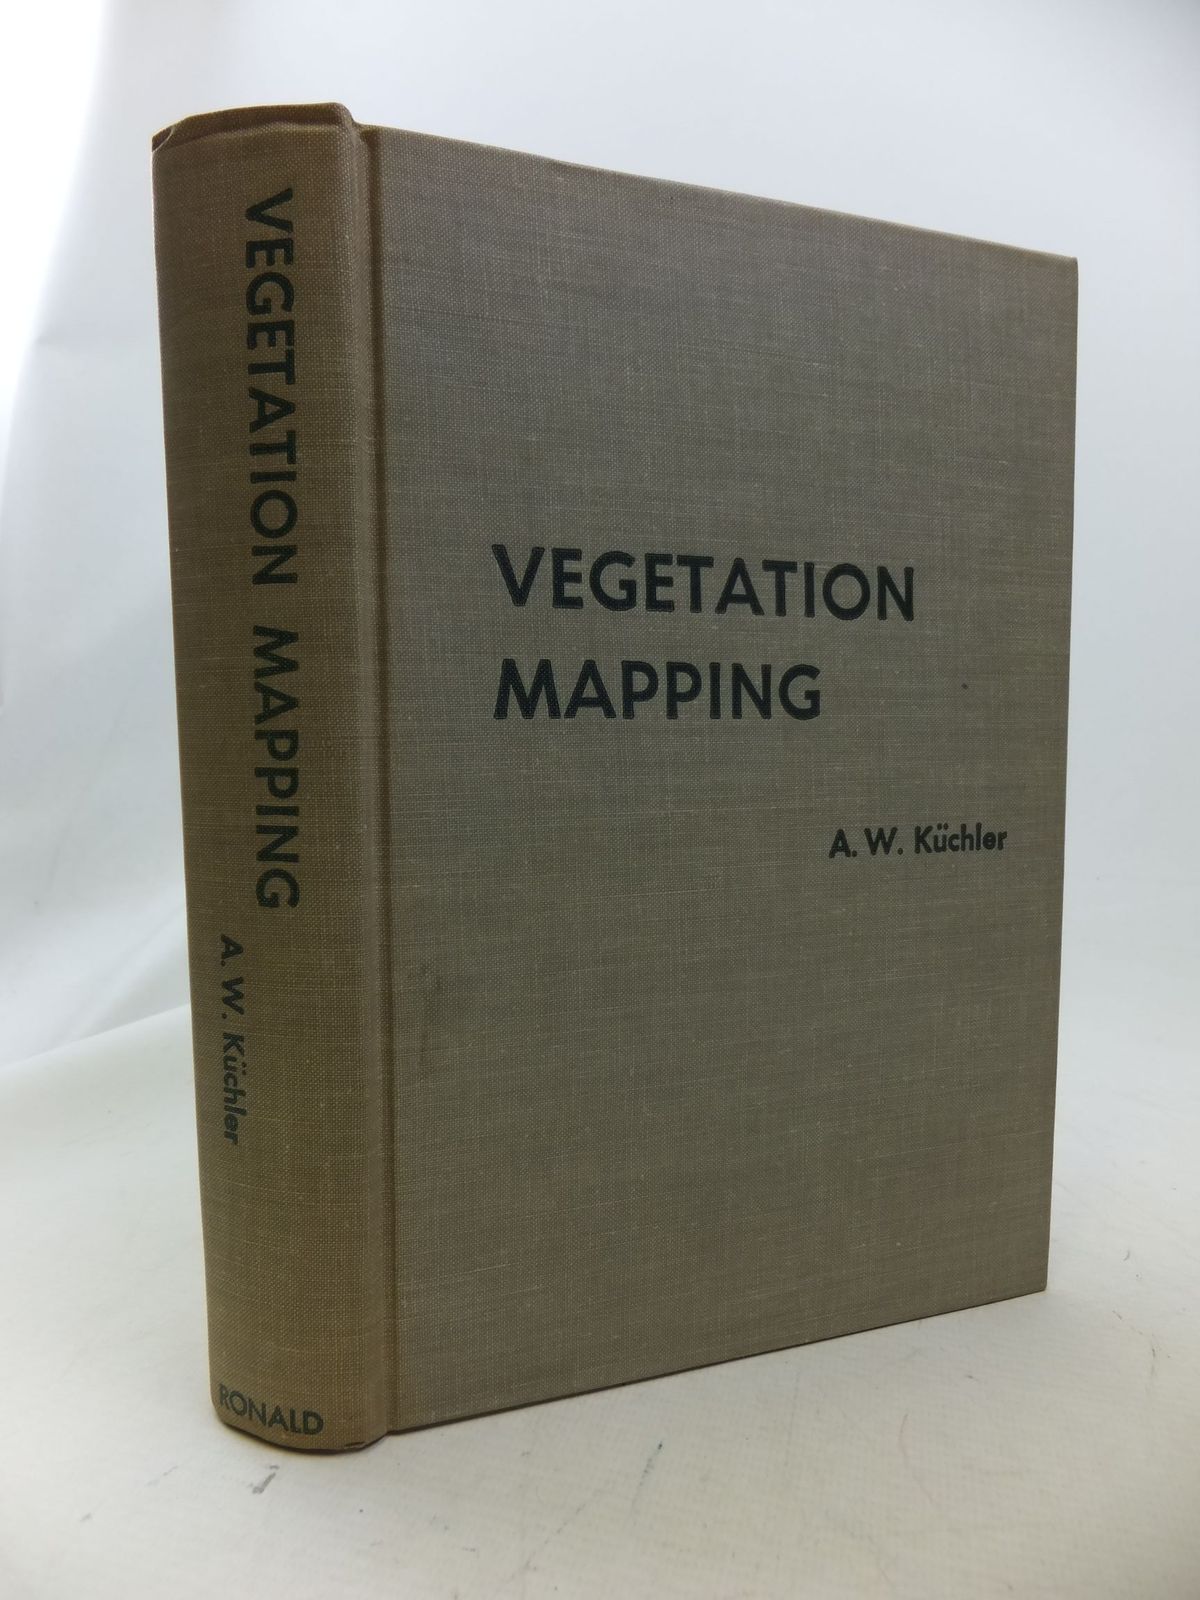 Photo of VEGETATION MAPPING written by Kuchler, A.W. published by The Ronald Press Company (STOCK CODE: 1710843)  for sale by Stella & Rose's Books